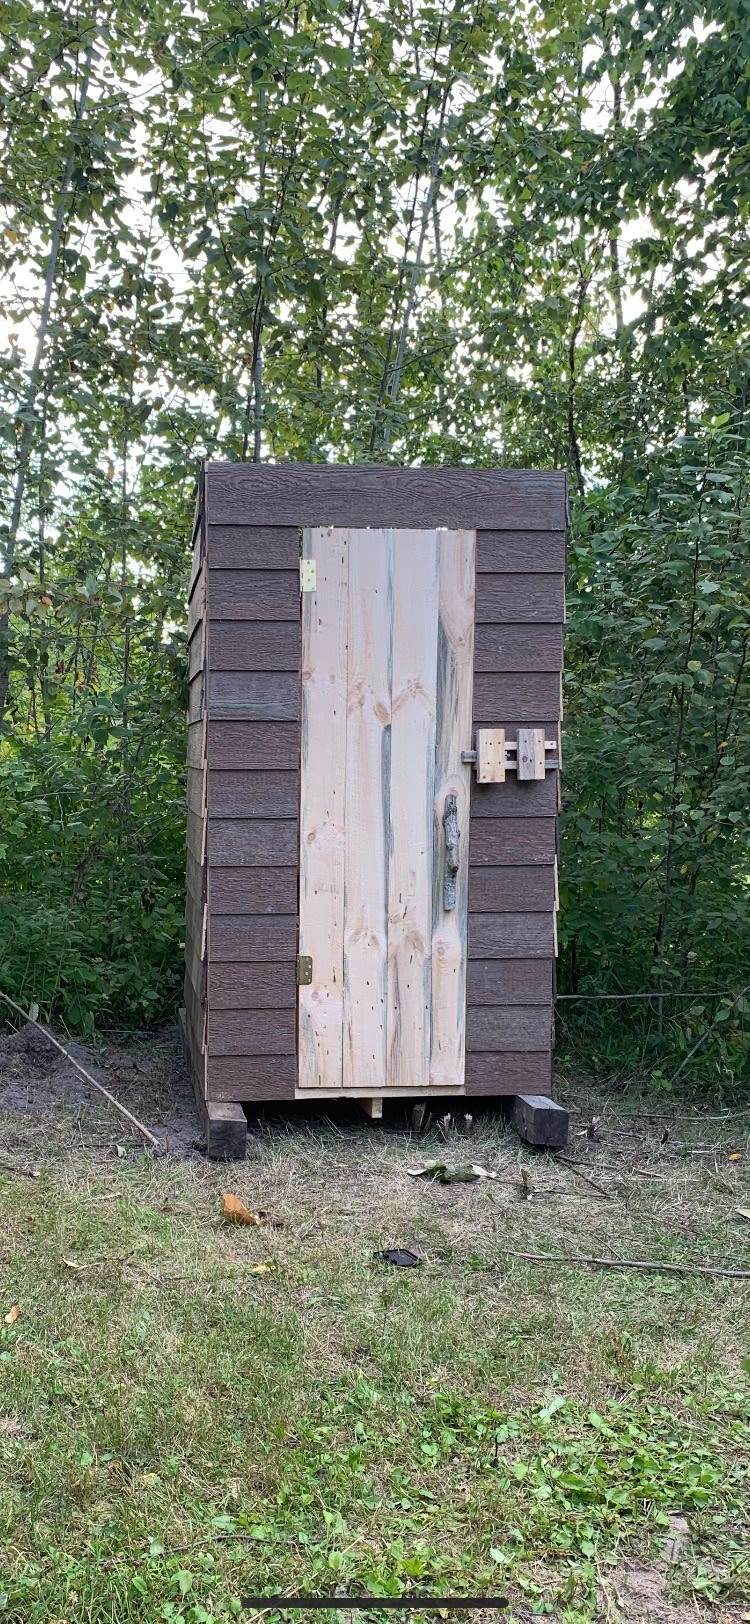 Outhouse for your use while staying at the Wolf Lake woods rustic retreat!
